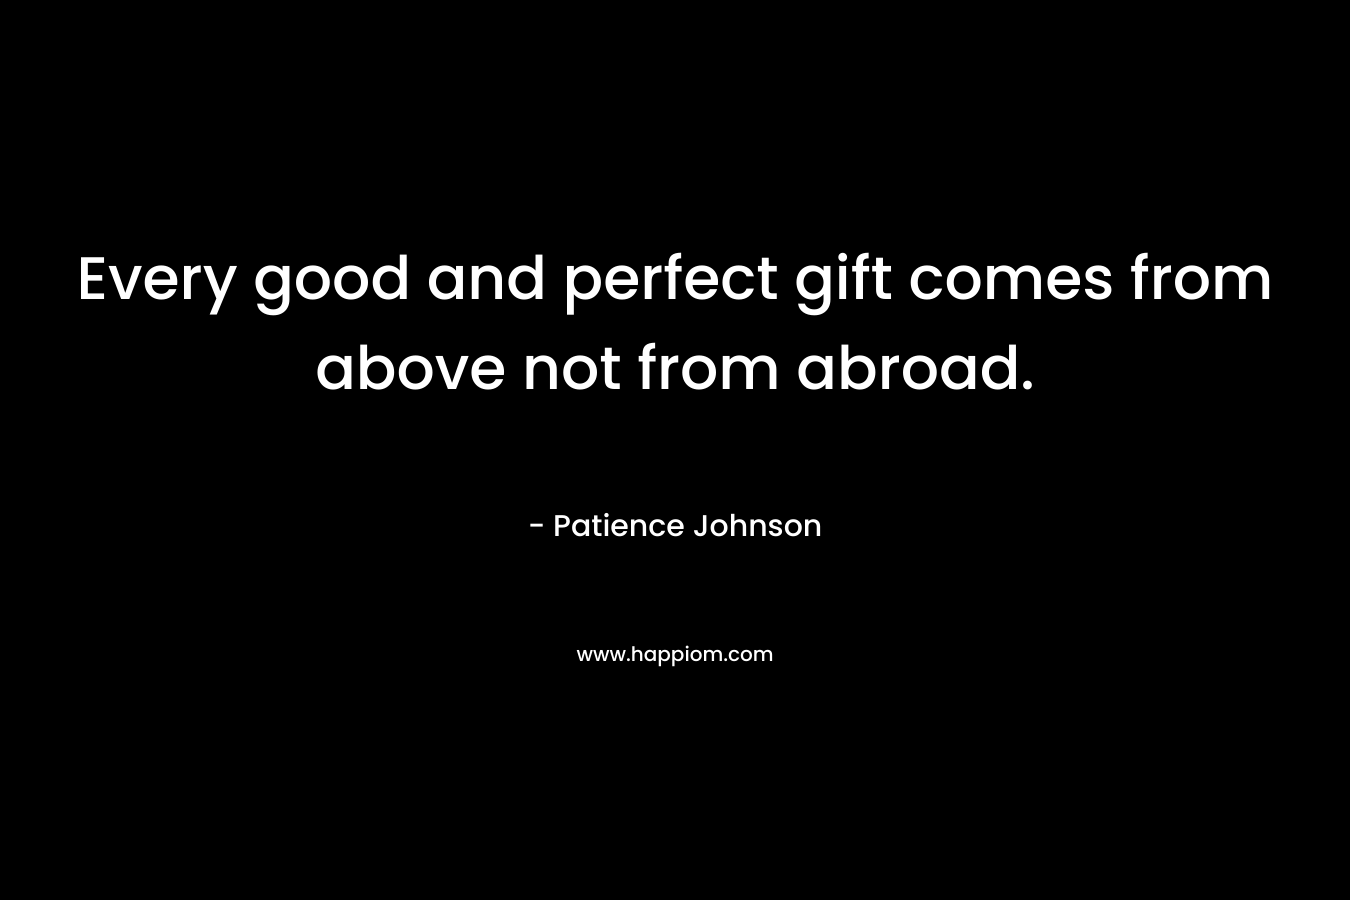 Every good and perfect gift comes from above not from abroad. – Patience Johnson